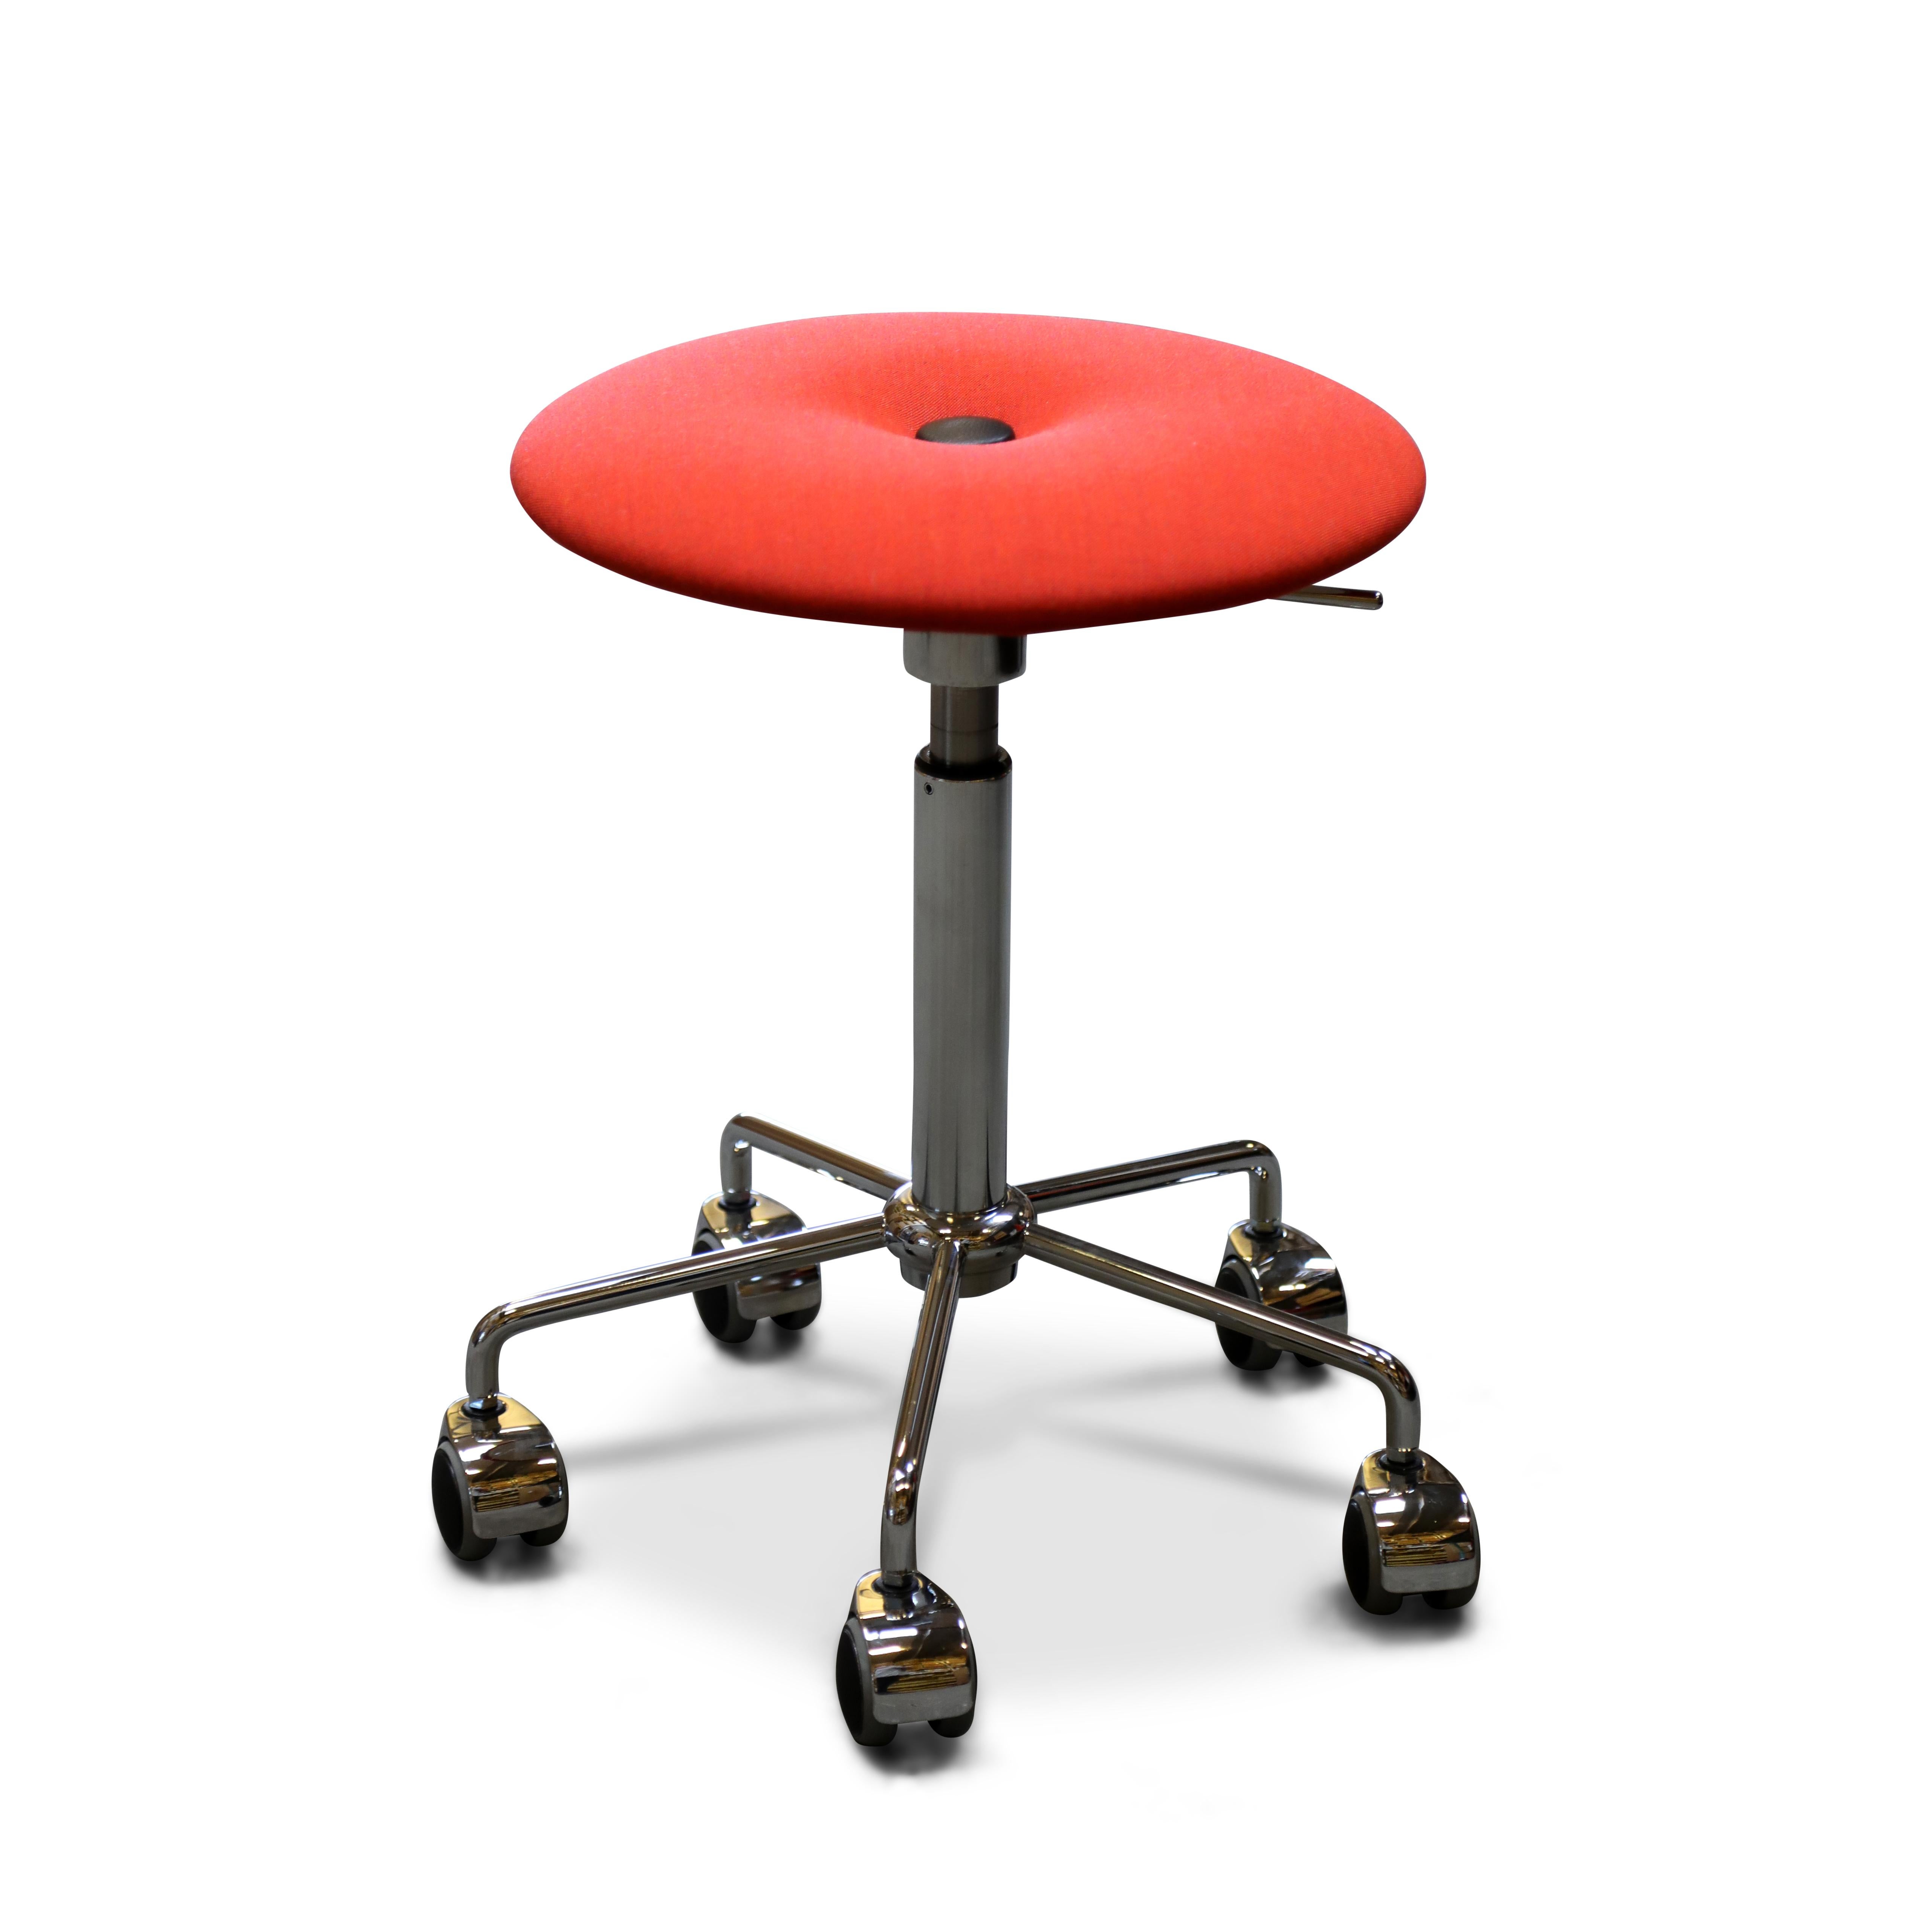 Danish Henrik Tengler, HT 2244 Time Stool by One Collection